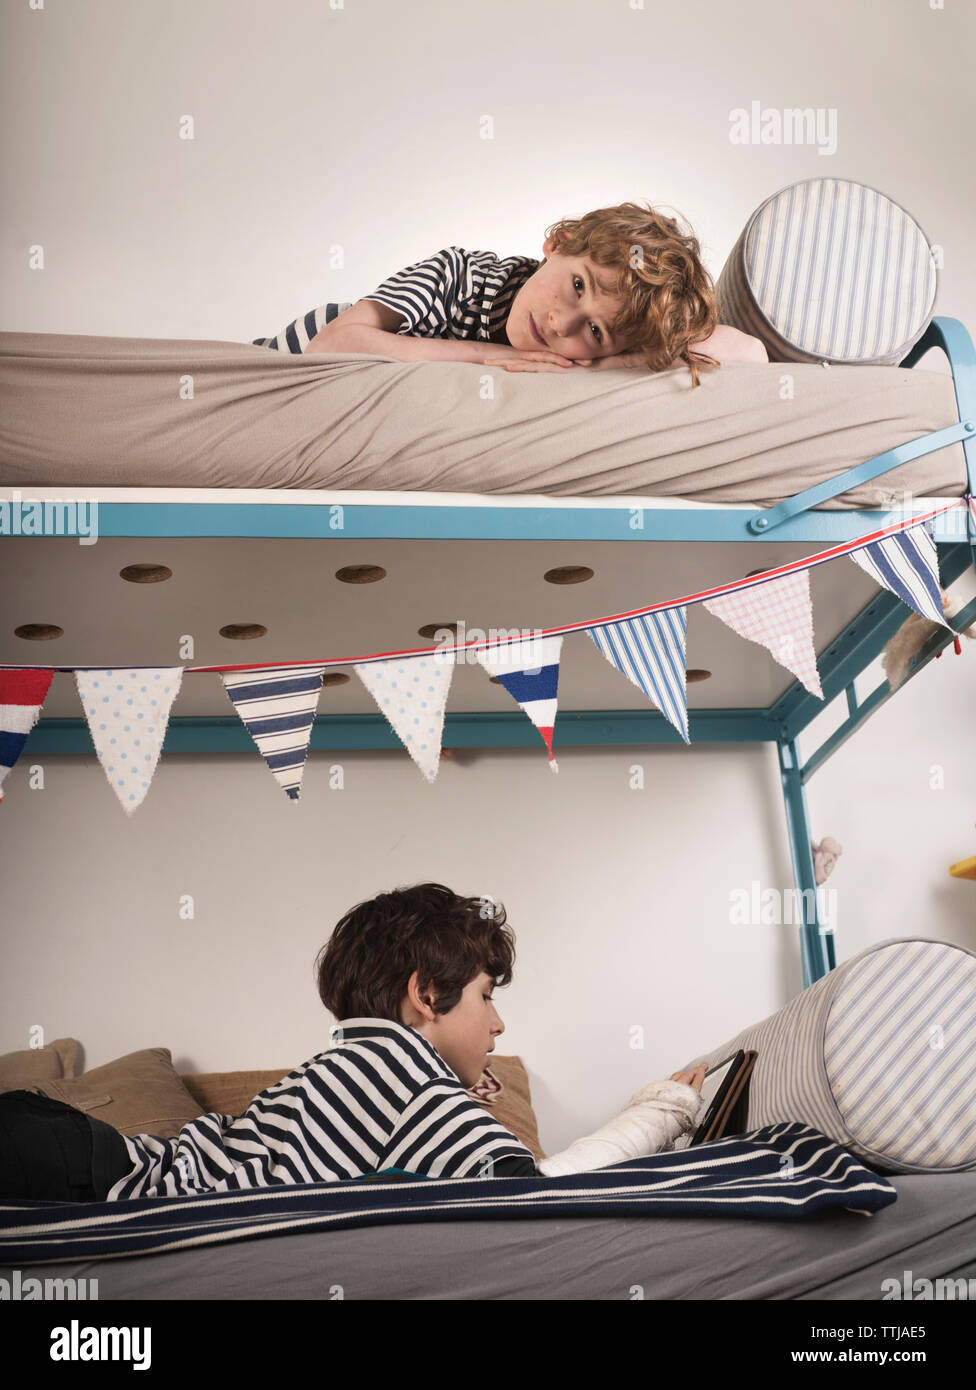 Brothers lying on bunkbed at home Stock Photo